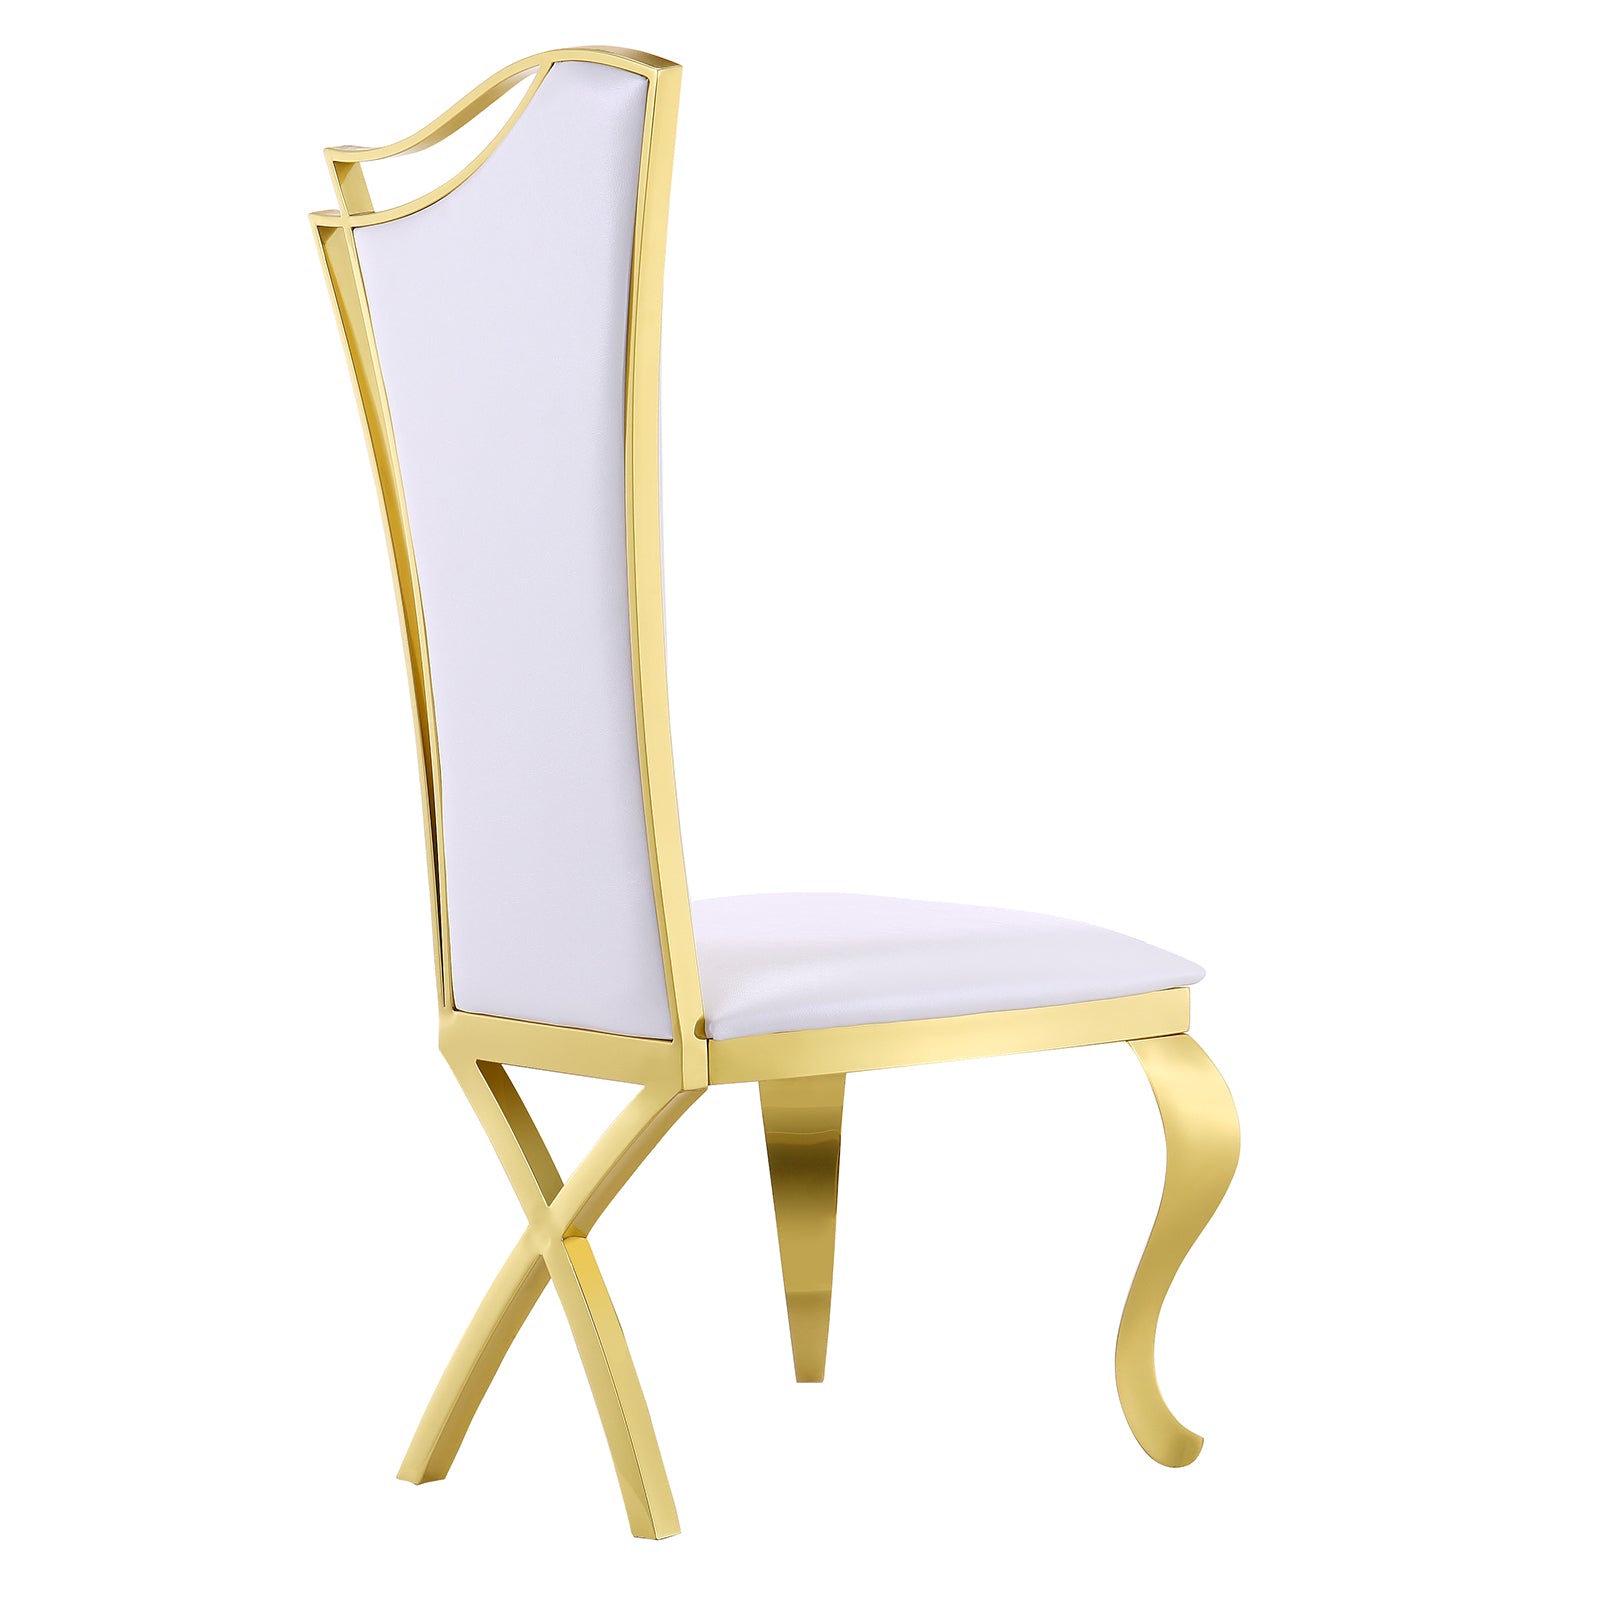 White Leather Upholstered Dining Chairs with Gorgeous Streamlined High Back and X-Shaped Metal Legs | C168